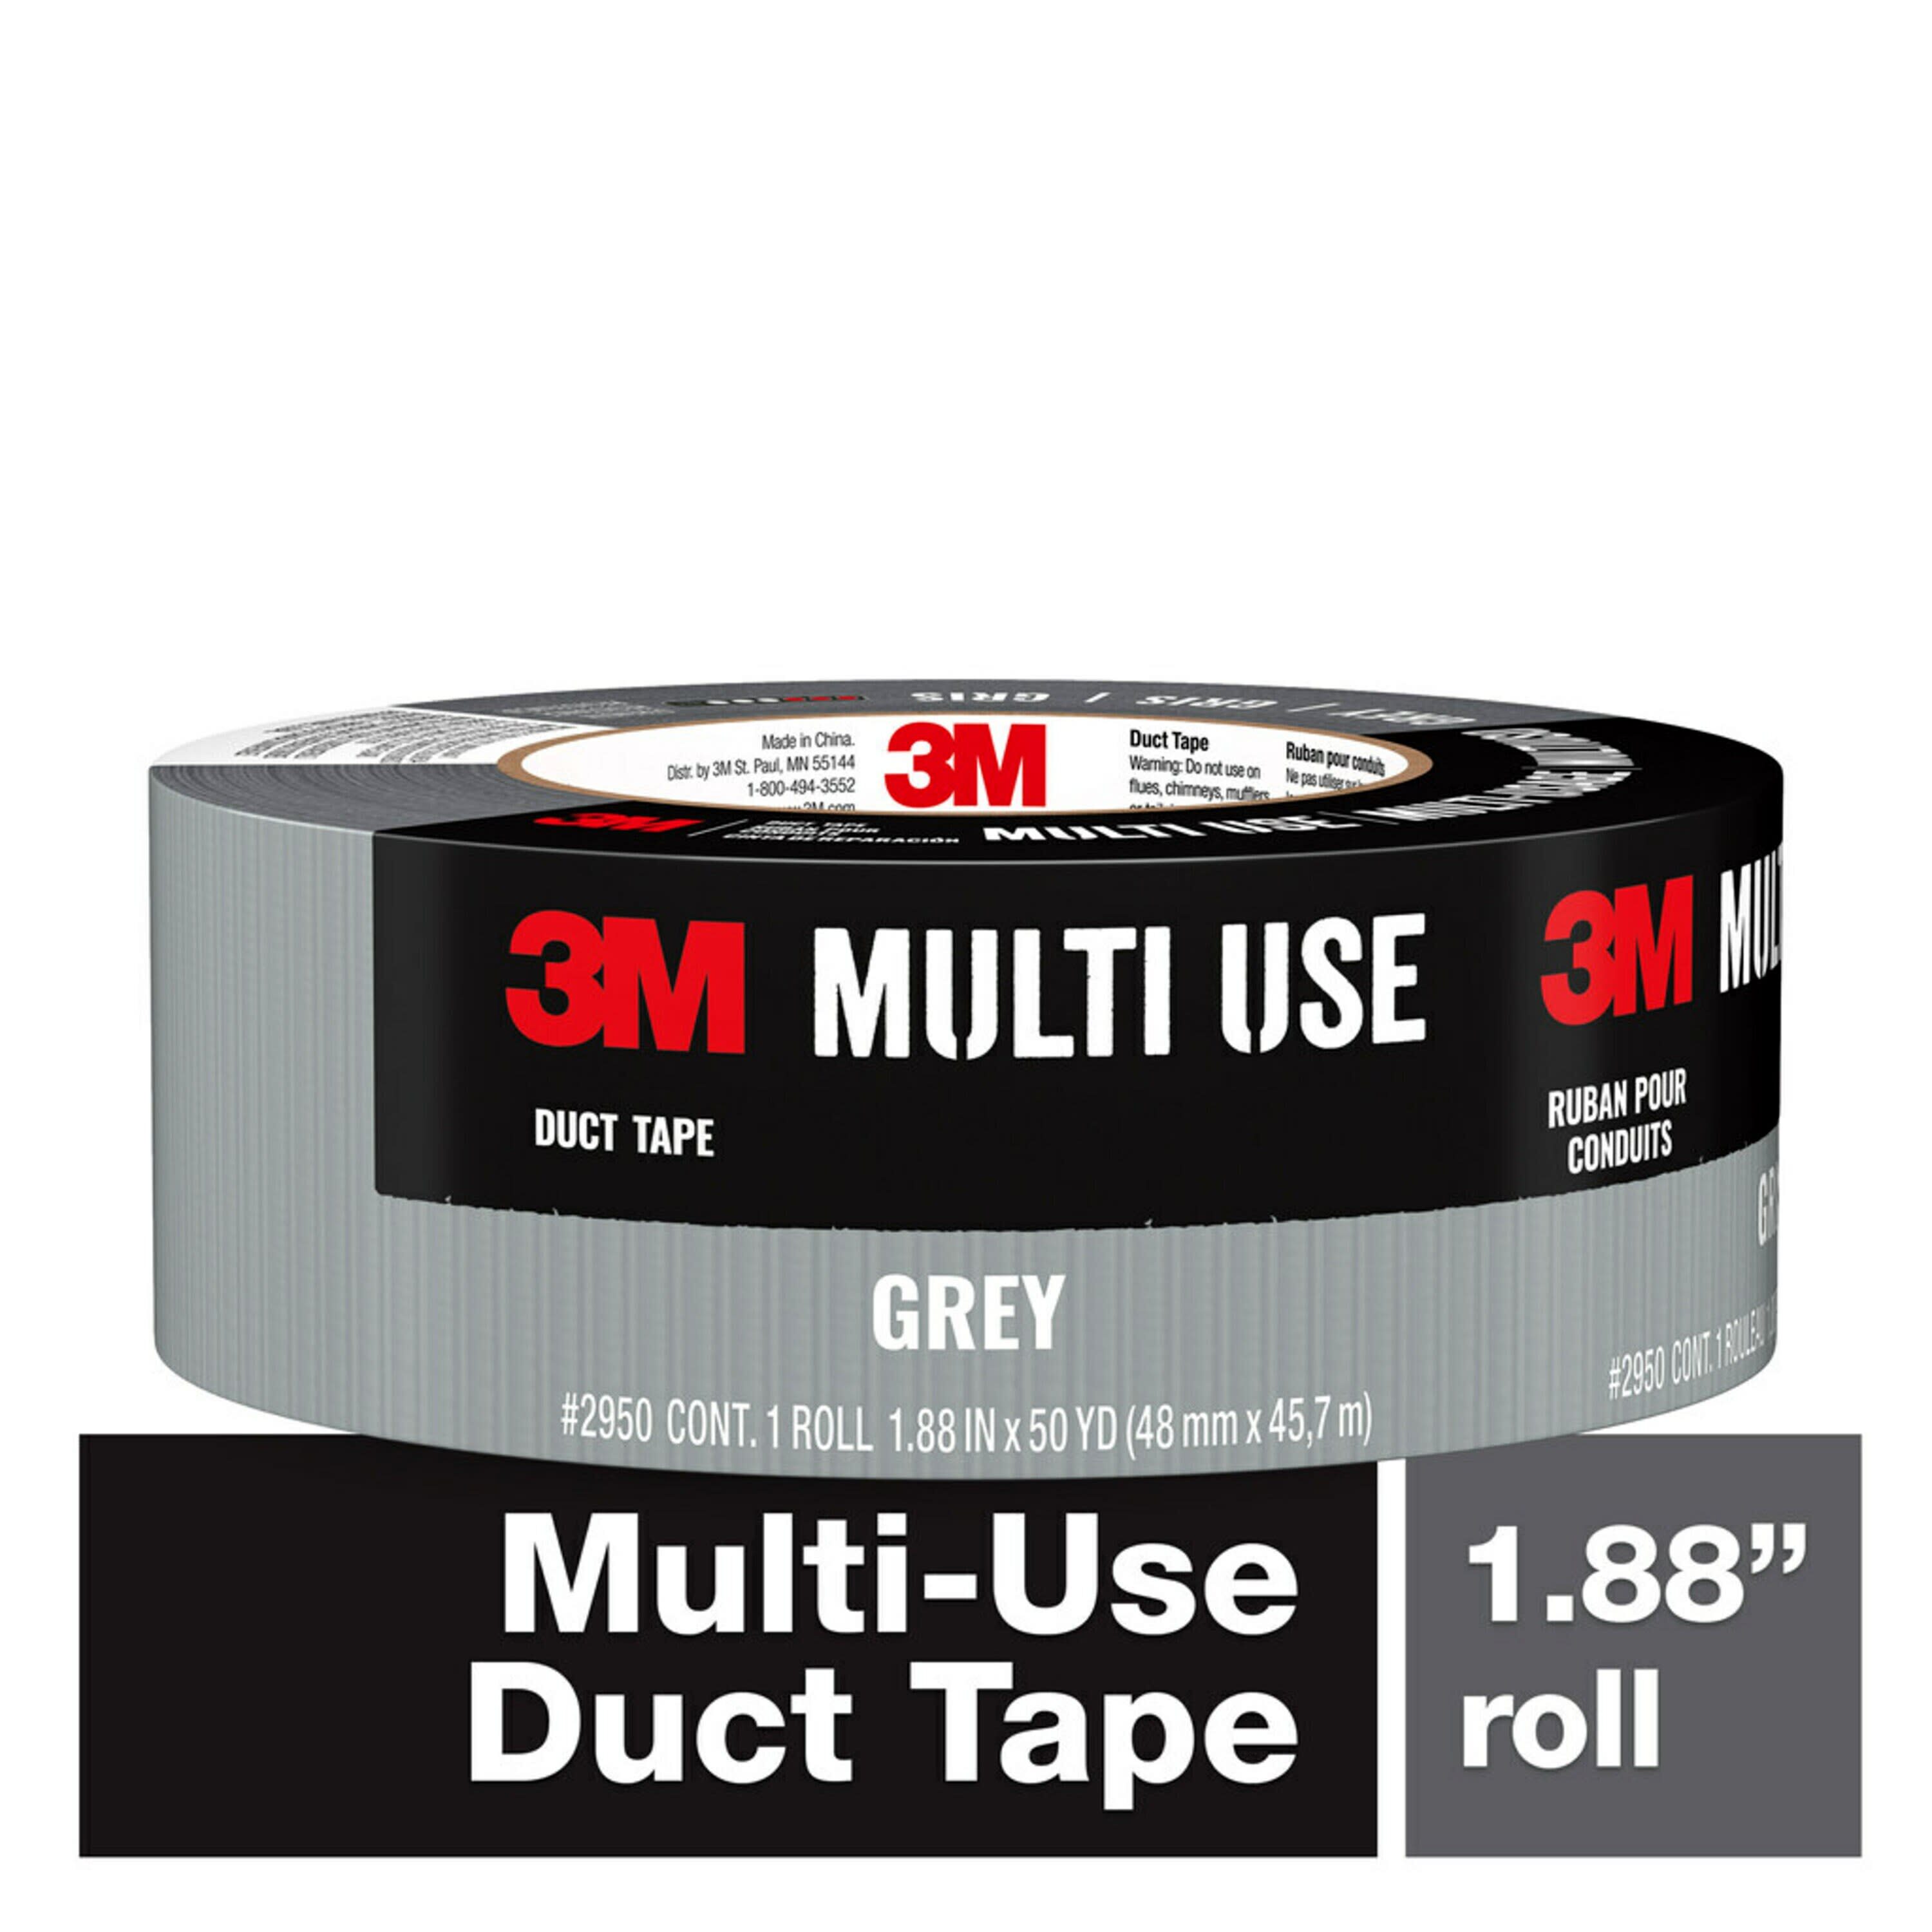 IRONFORCE 1.89 in. x 35 yd. All-Purpose Heavy-Duty Duct Tape in Gray Pro  Pack (12-Pack) 1427831 - The Home Depot